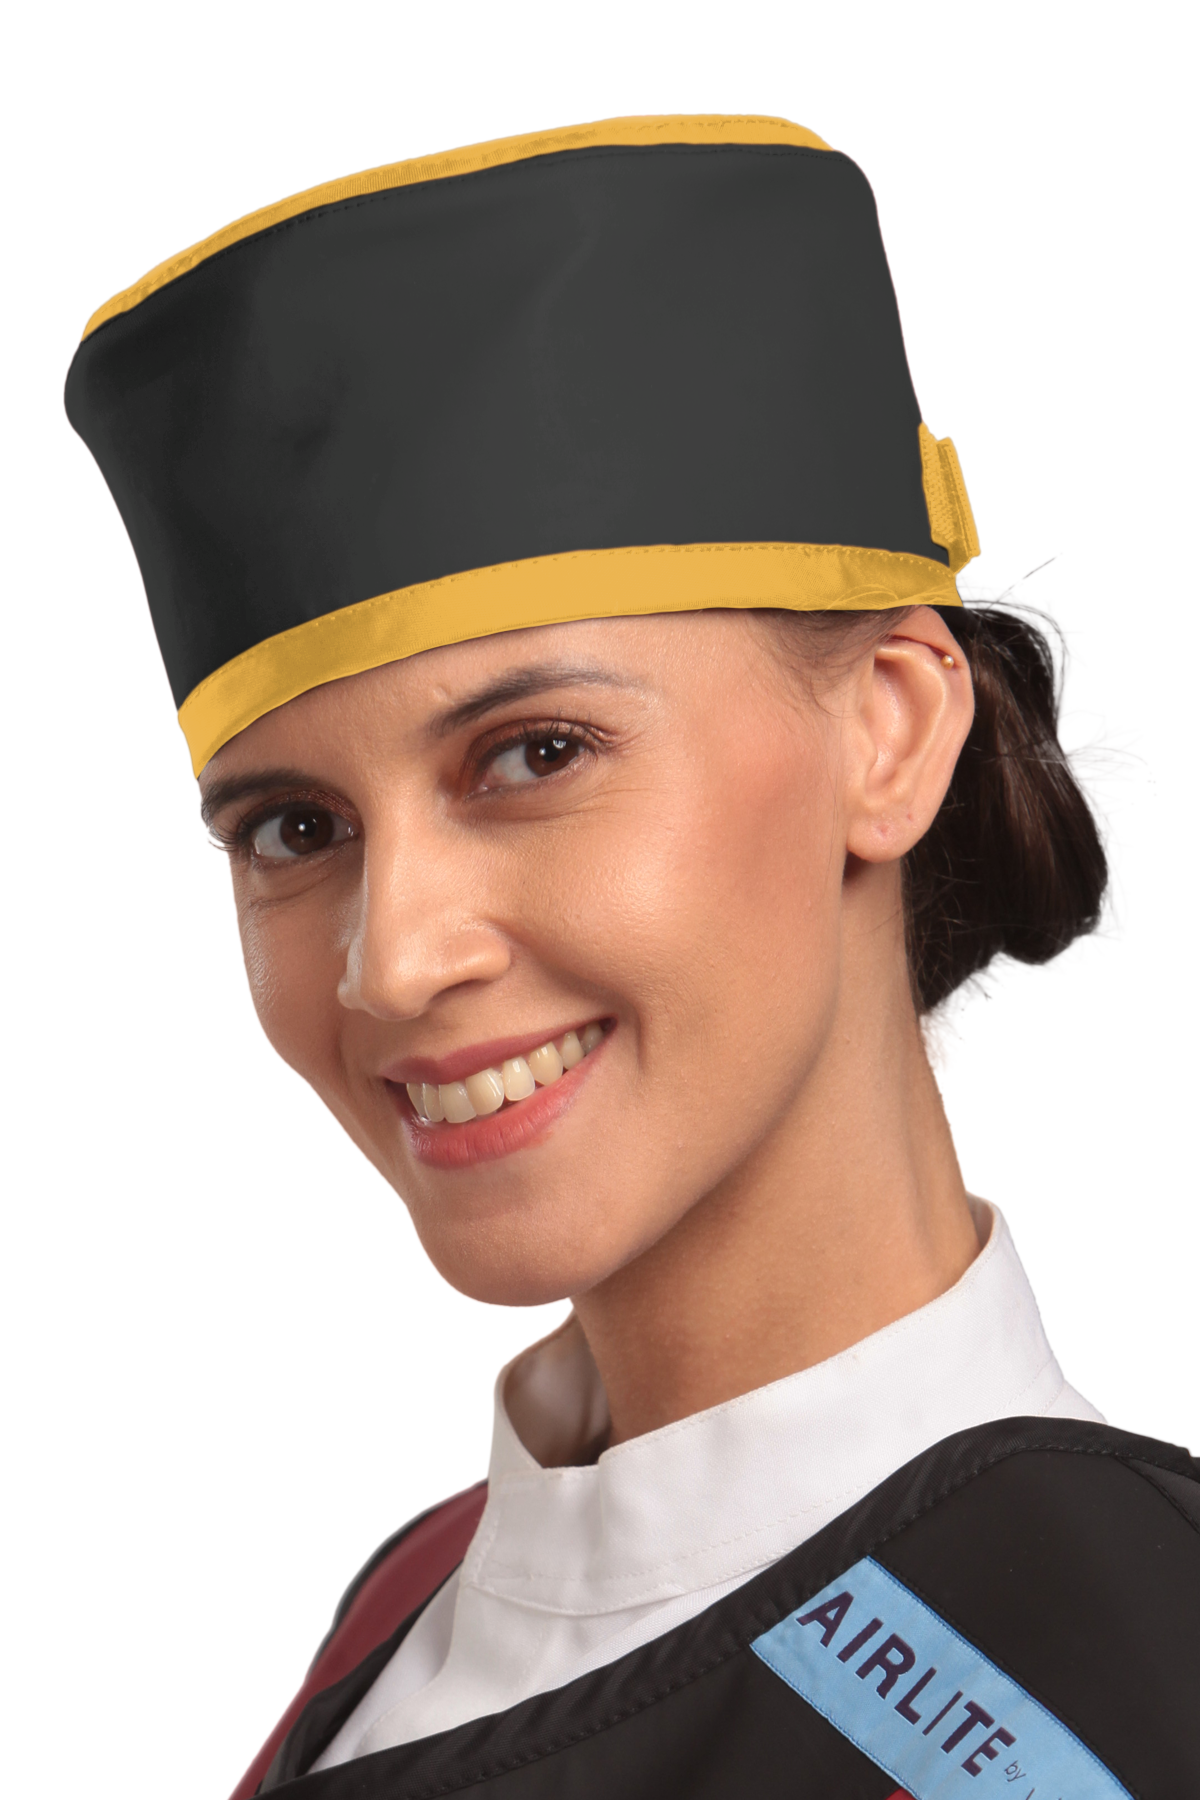 Up-close left-side frontal view of a female model wearing a radiation protection head shield. The head shield is Jet black with yellow-colored lines around the lower and upper edges.